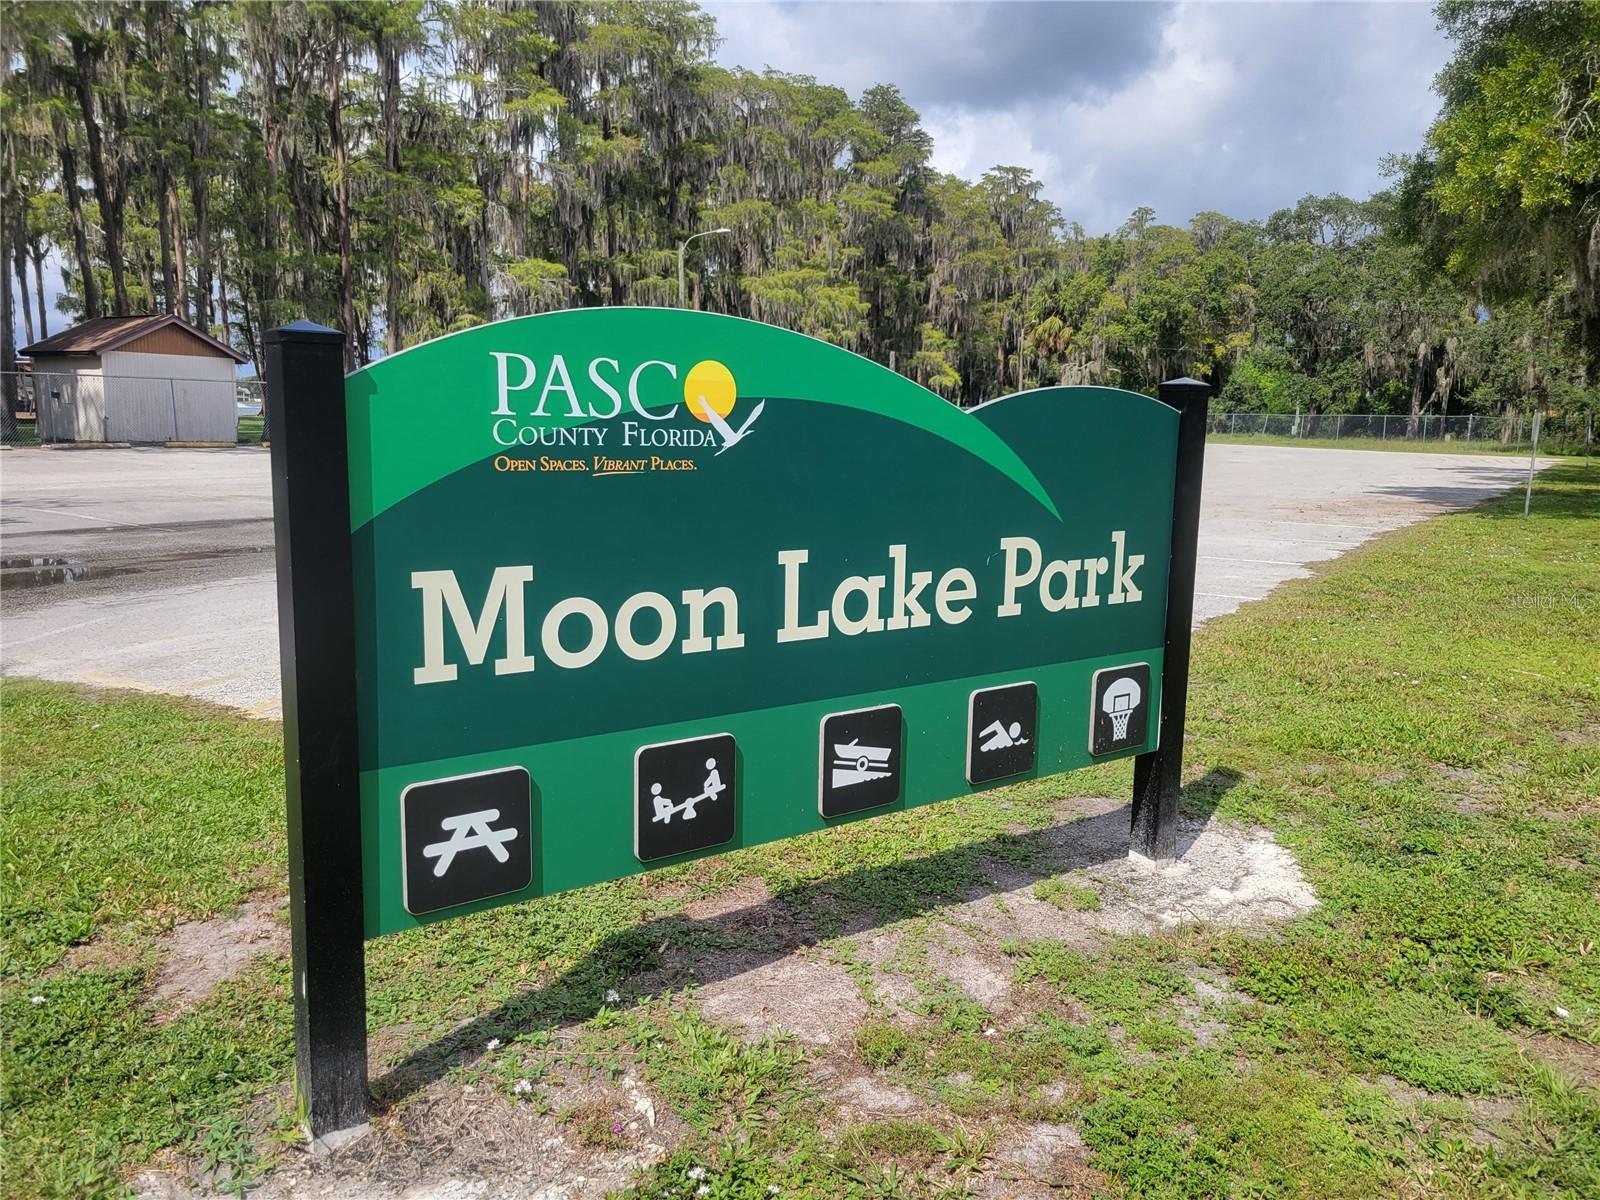 Moon Lake community with park, picnic area and boat launch into Moon Lake.